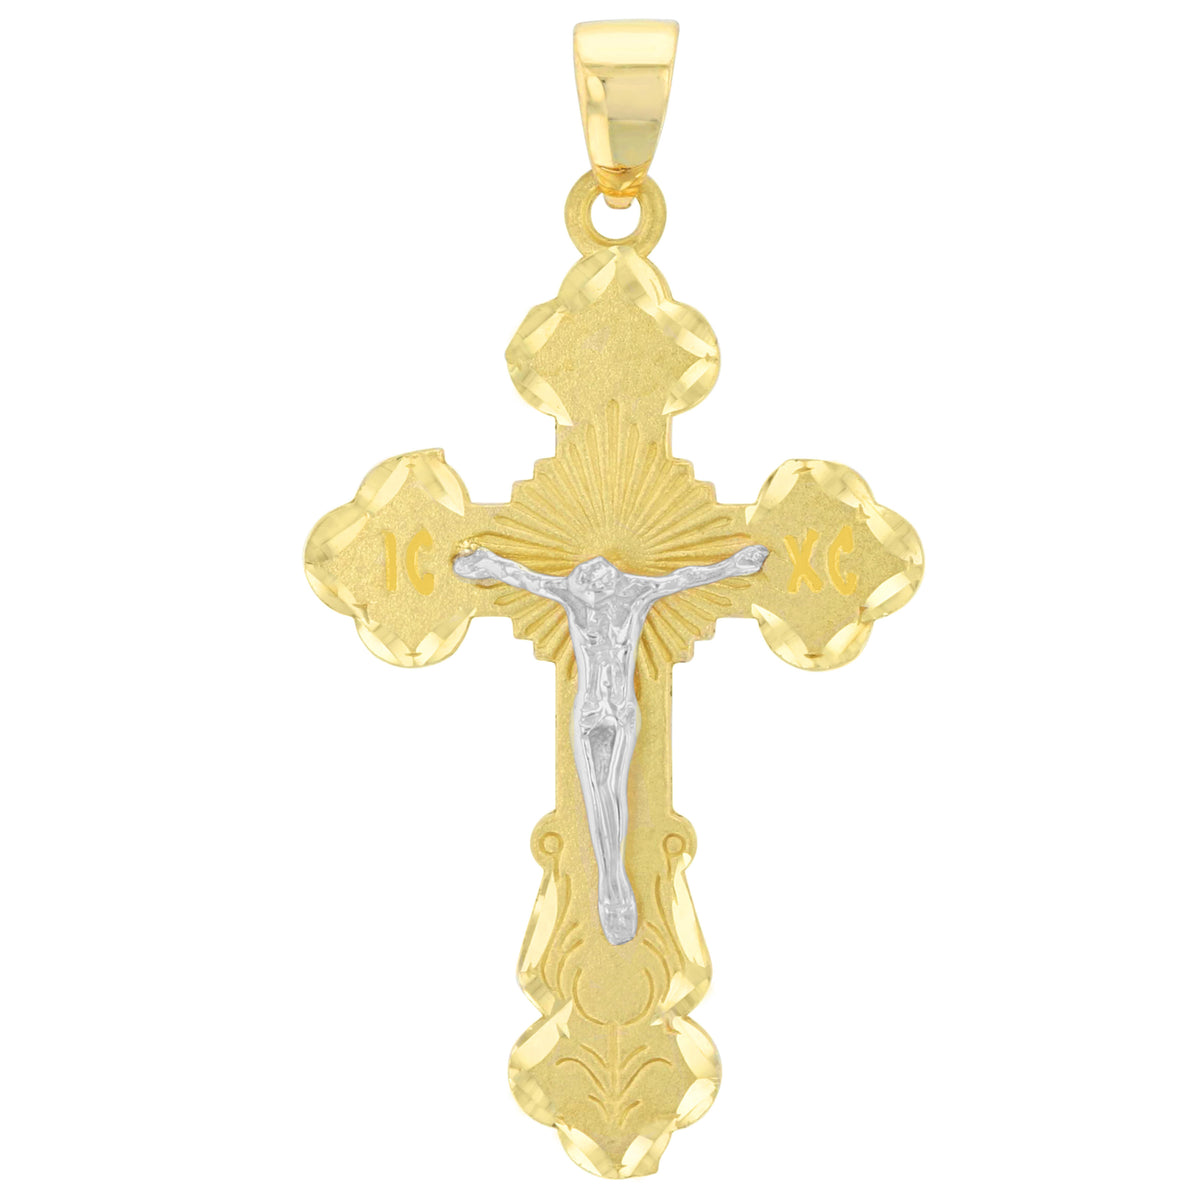 Solid 14K Two Tone Gold Eastern Orthodox Save and Protect Cross ICXC Crucifix Pendant